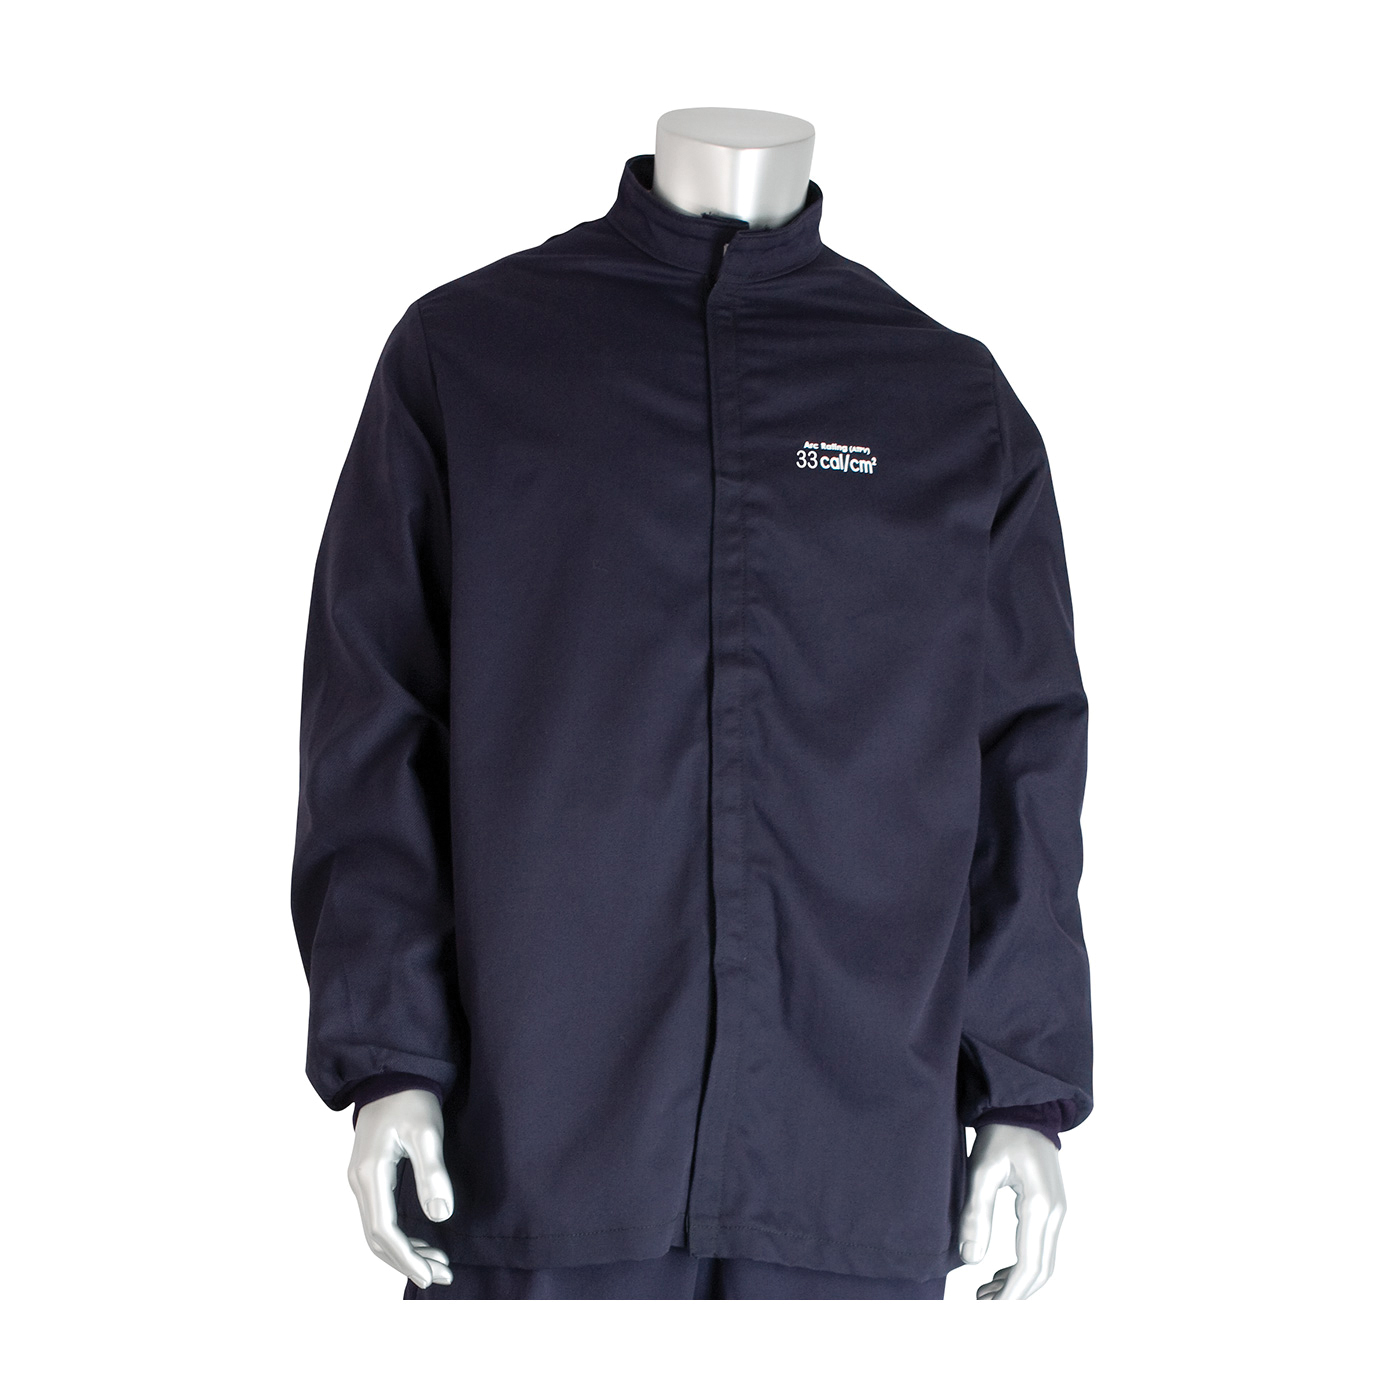 PIP® 9100-52680/L Arc and Flame Resistant Jacket, L, Navy, Westex® UltraSoft® 88% Cotton 12% High Tenacity Nylon, 44 to 46 in Chest, Resists: Arc and Flame, ASTM F1506-10a, ASTM F2178-12